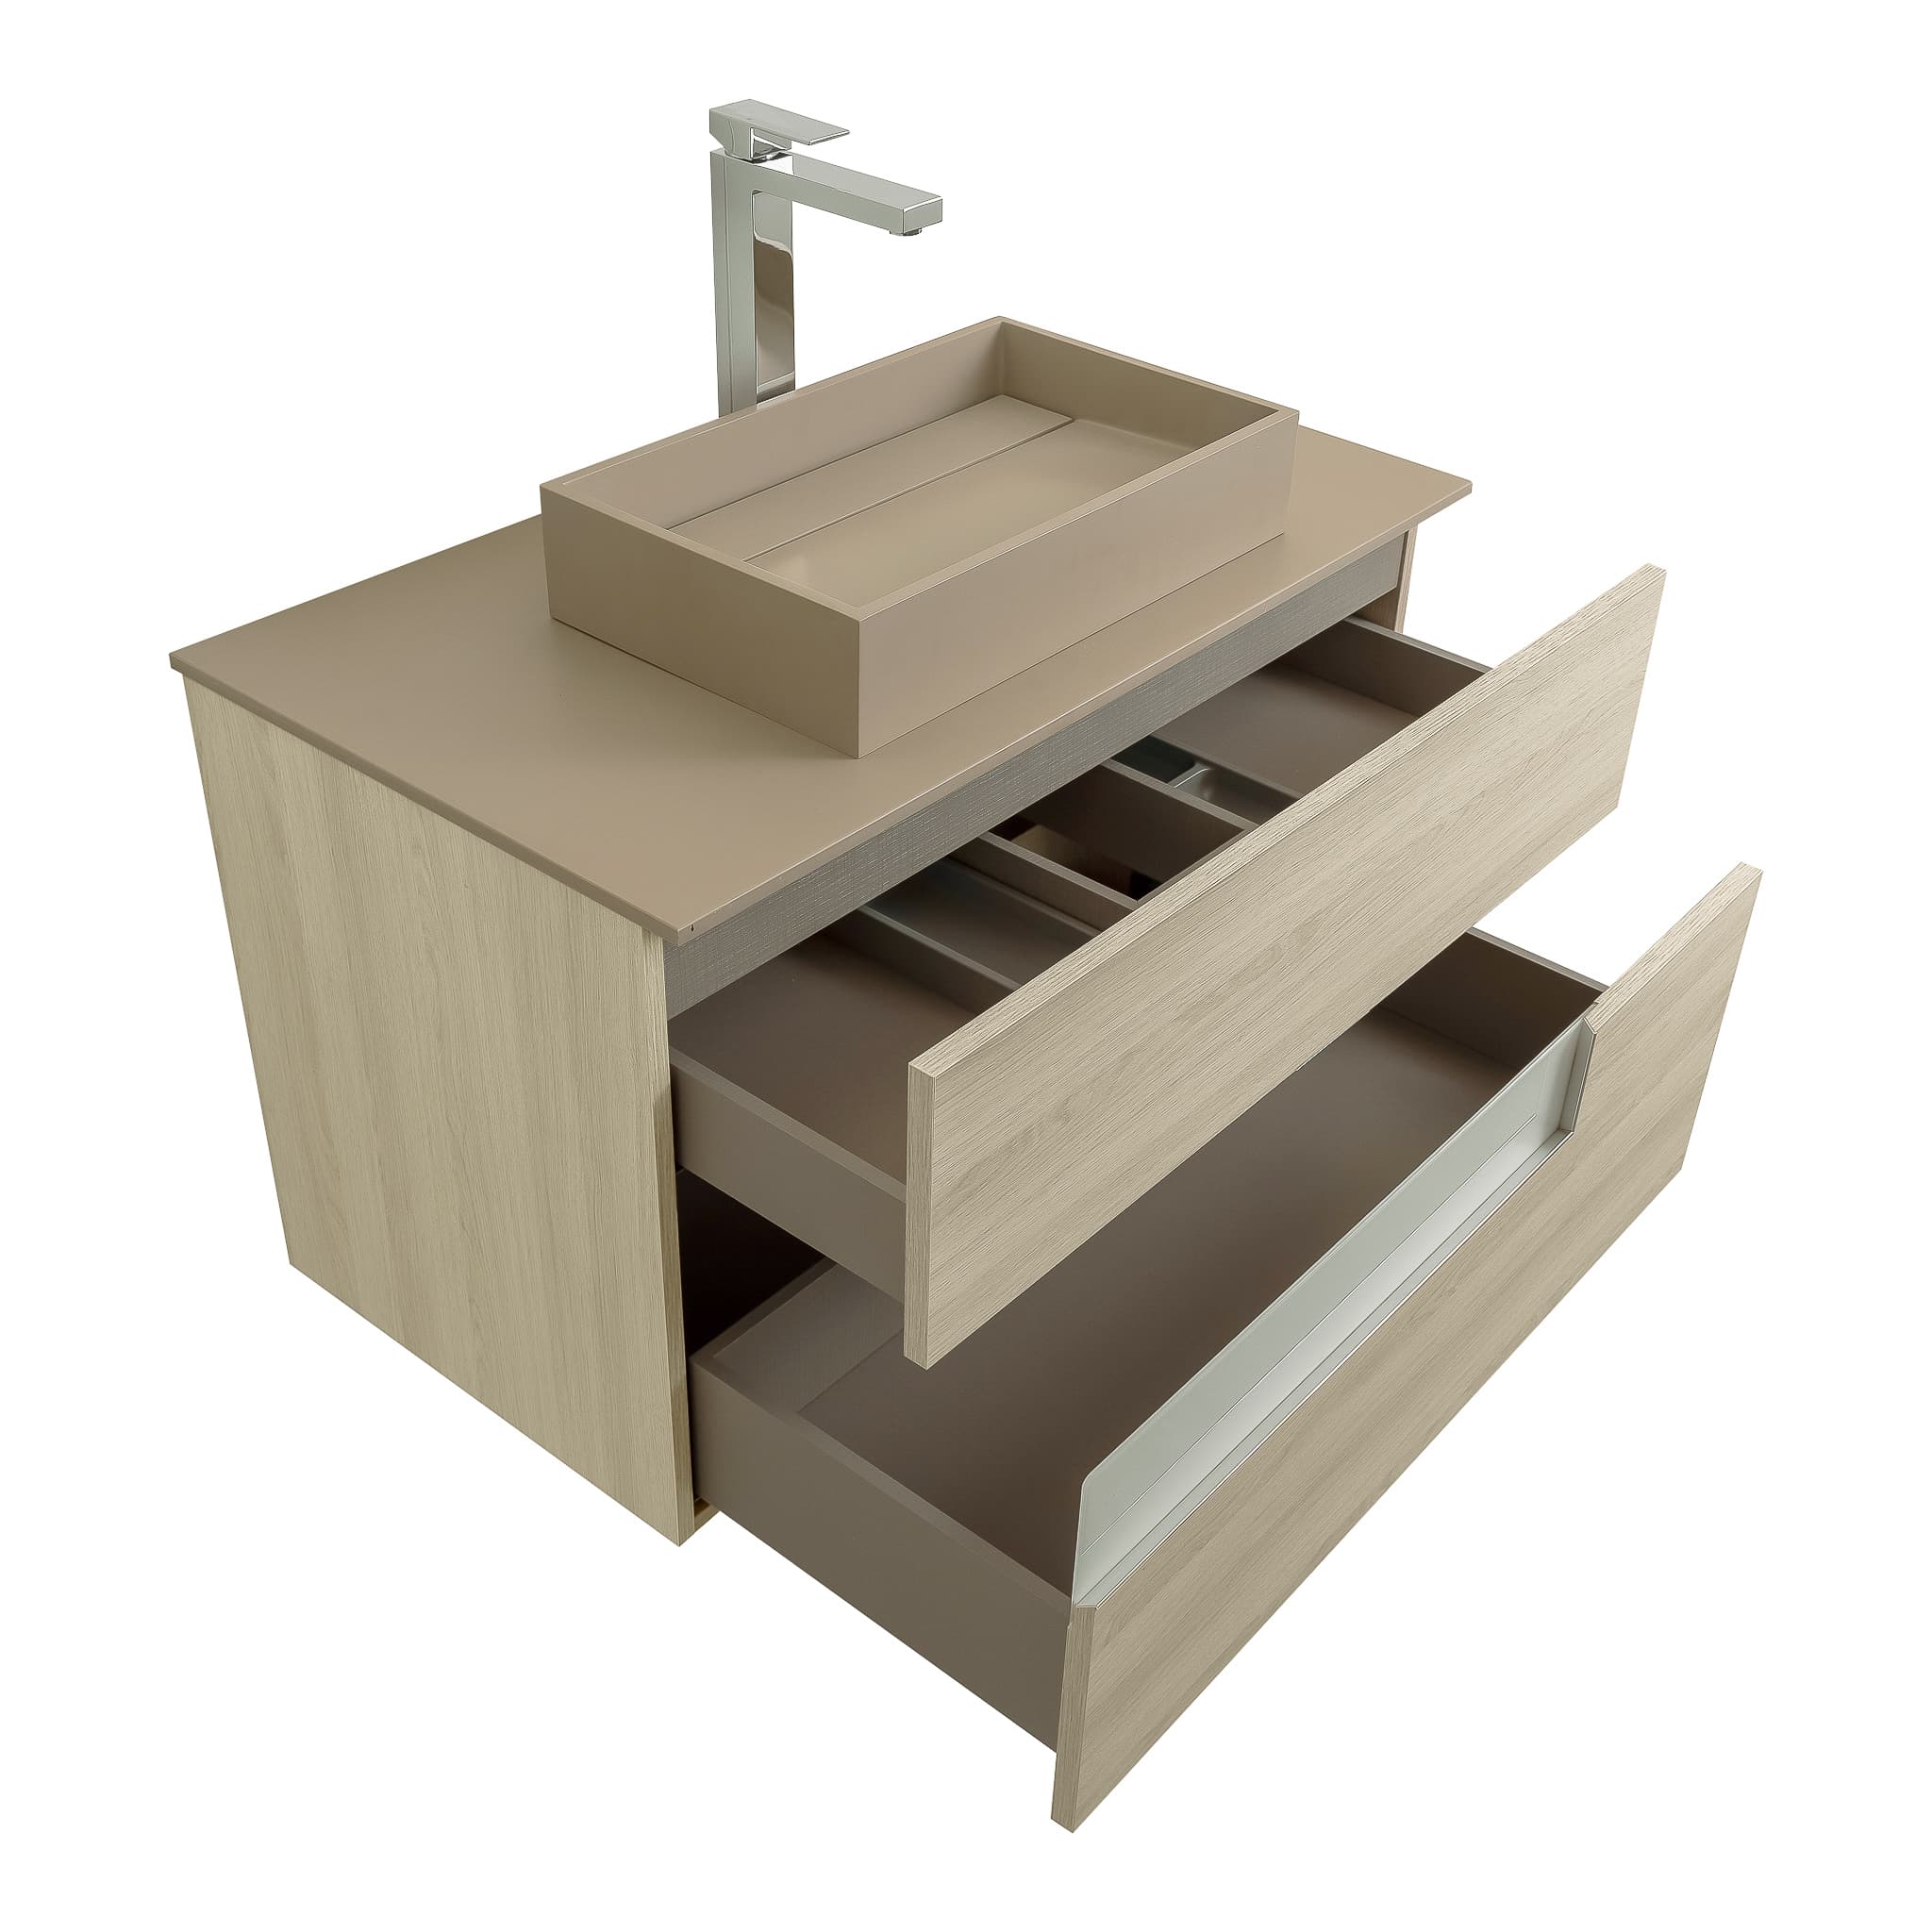 Vision 31.5 Natural Light Wood Cabinet, Solid Surface Flat Taupe Counter And Infinity Square Solid Surface Taupe Basin 1329, Wall Mounted Modern Vanity Set